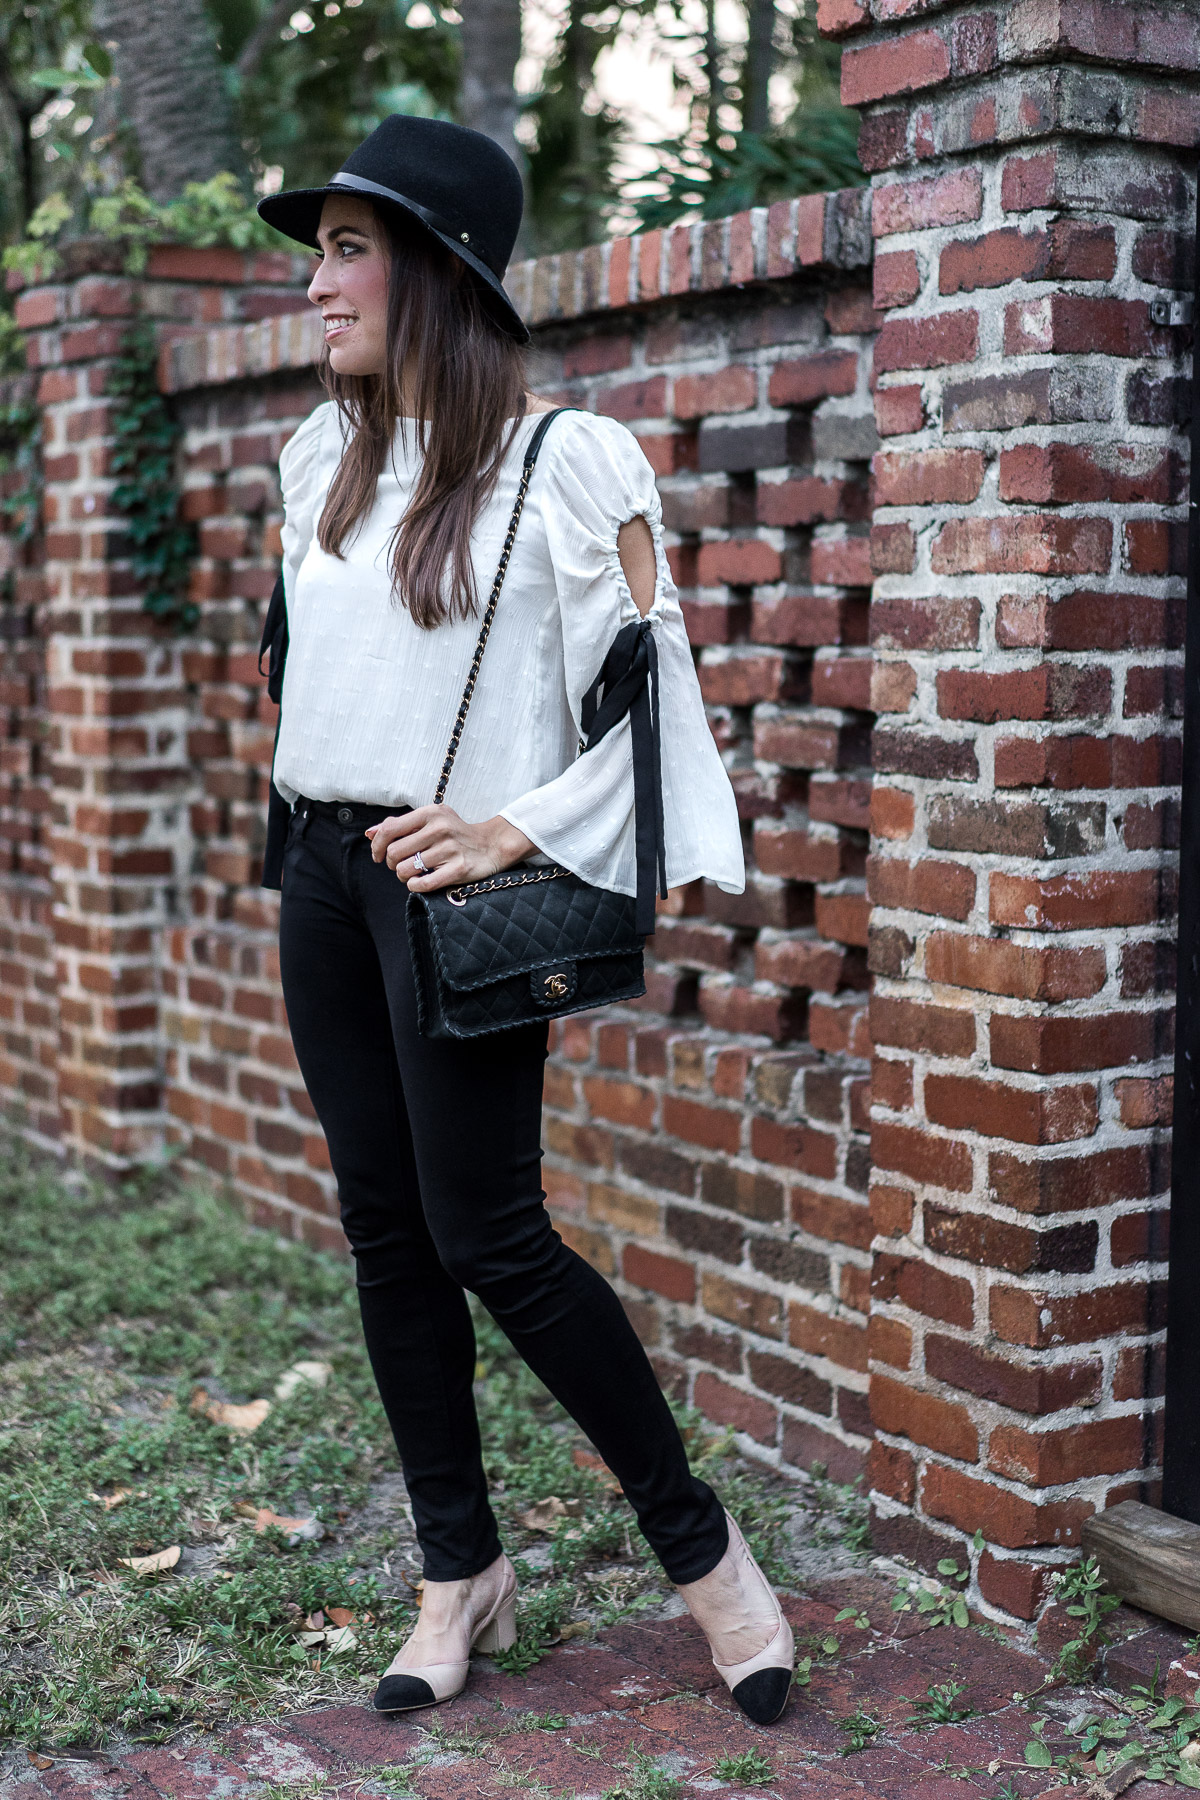 Styling a Bell Sleeve Top - A Glam Lifestyle